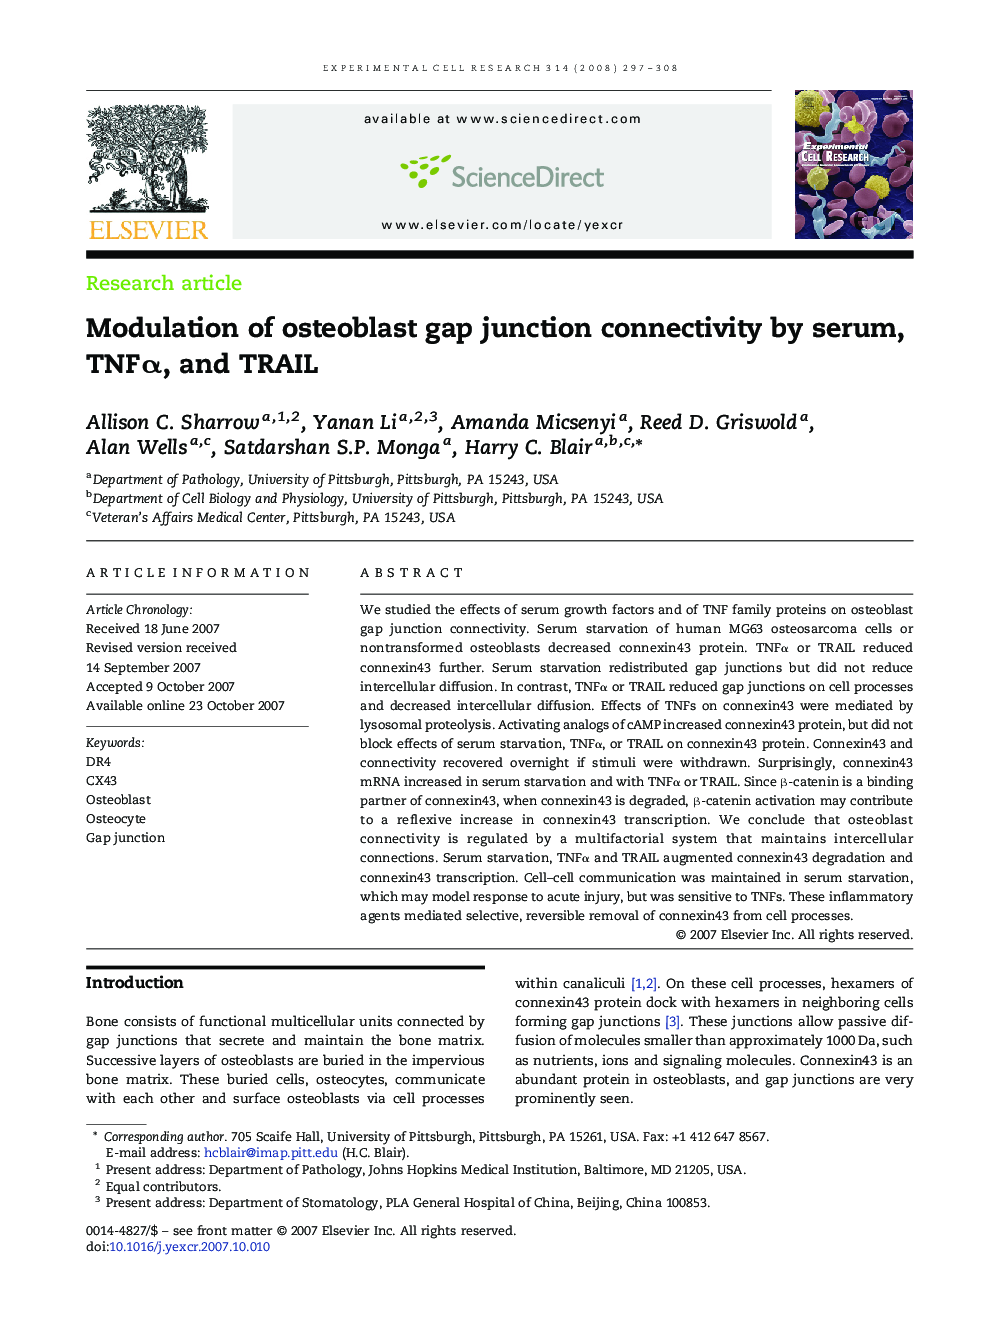 Modulation of osteoblast gap junction connectivity by serum, TNFÎ±, and TRAIL